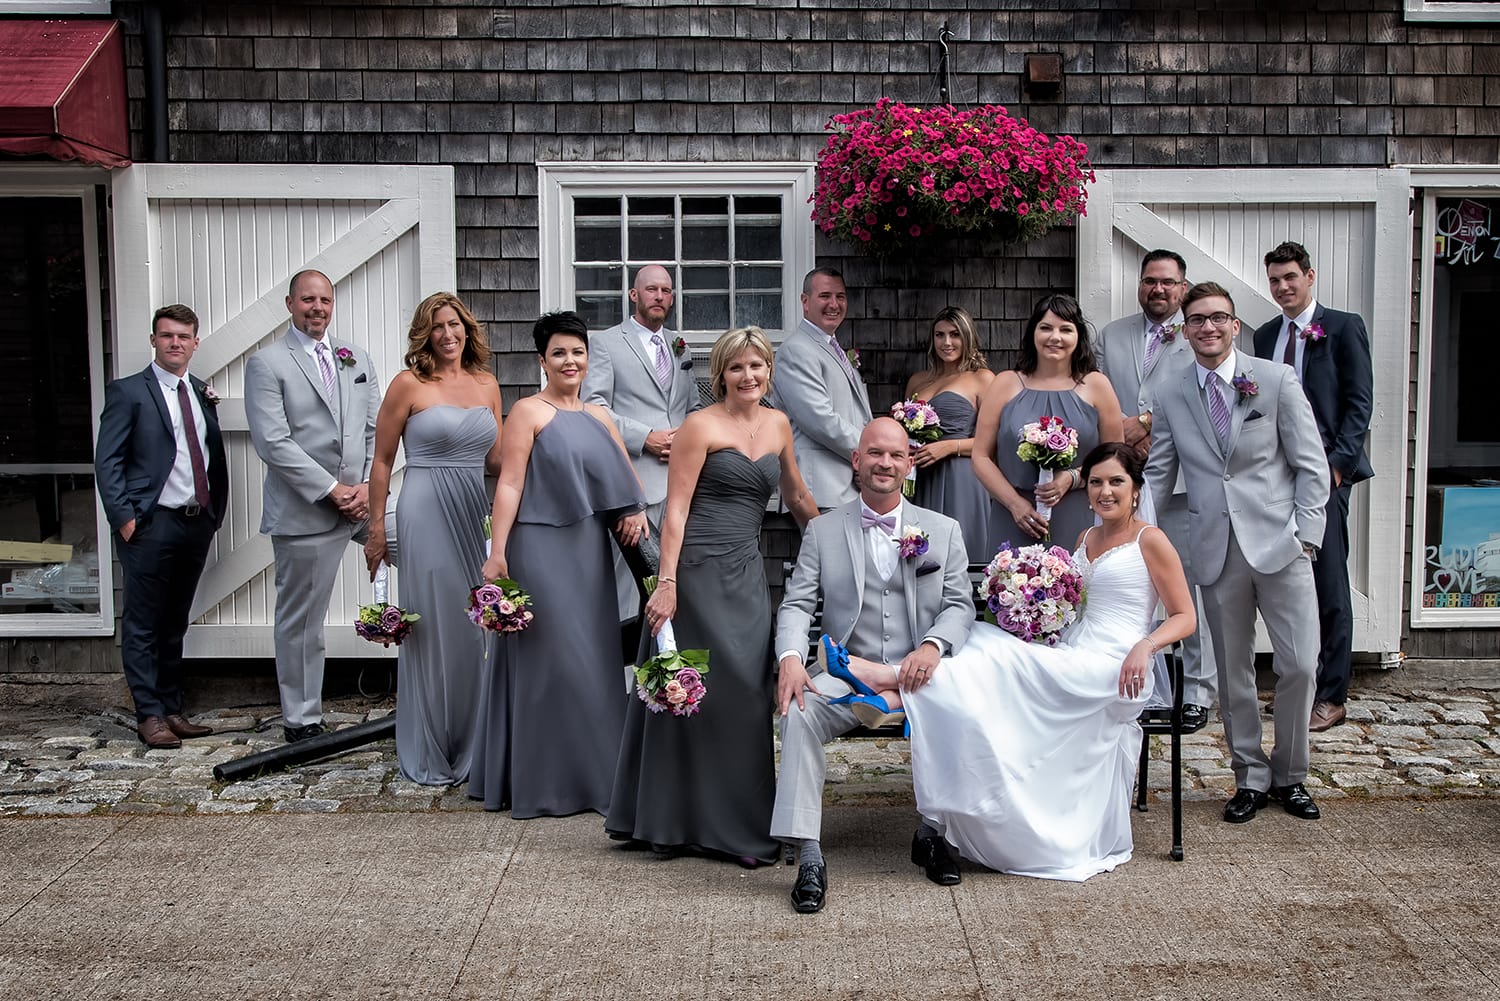 A bride, groom and their wedding party photos at the Historic Properties in Halifax NS.